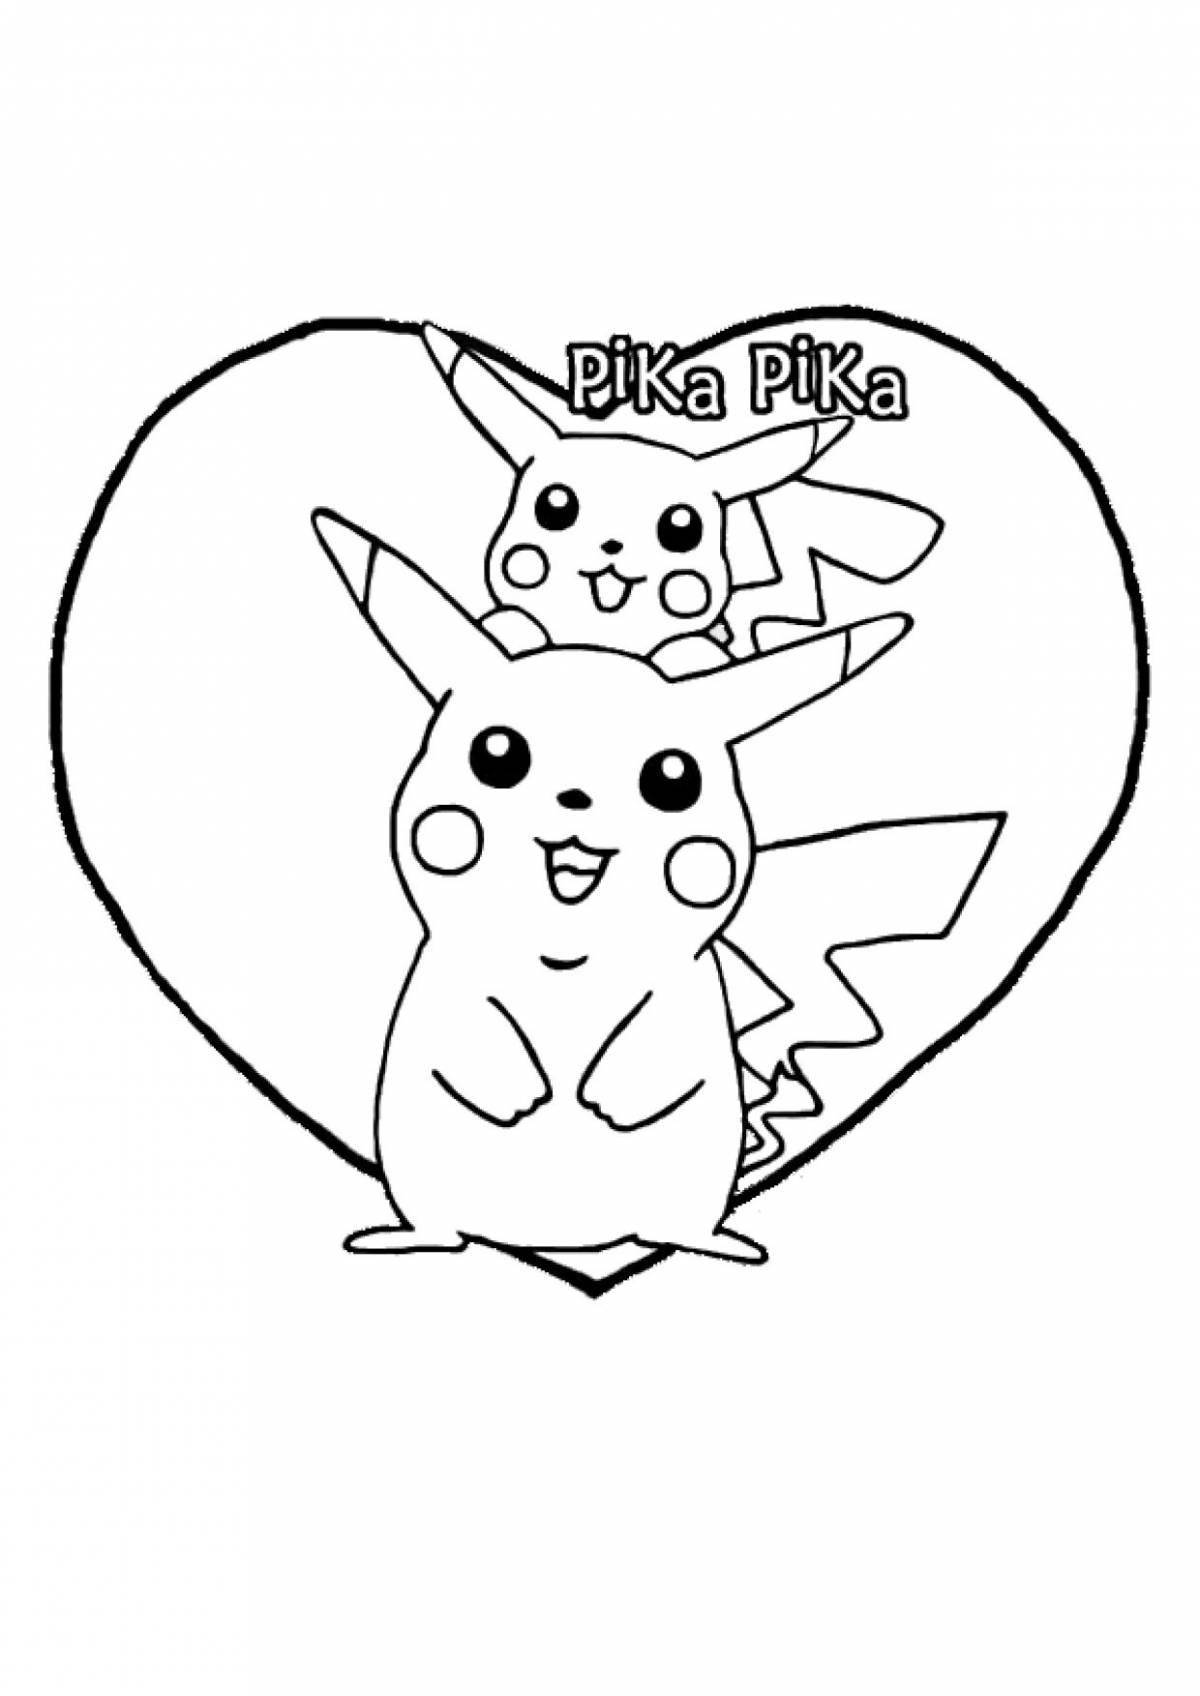 Violent pikachu with a heart coloring page